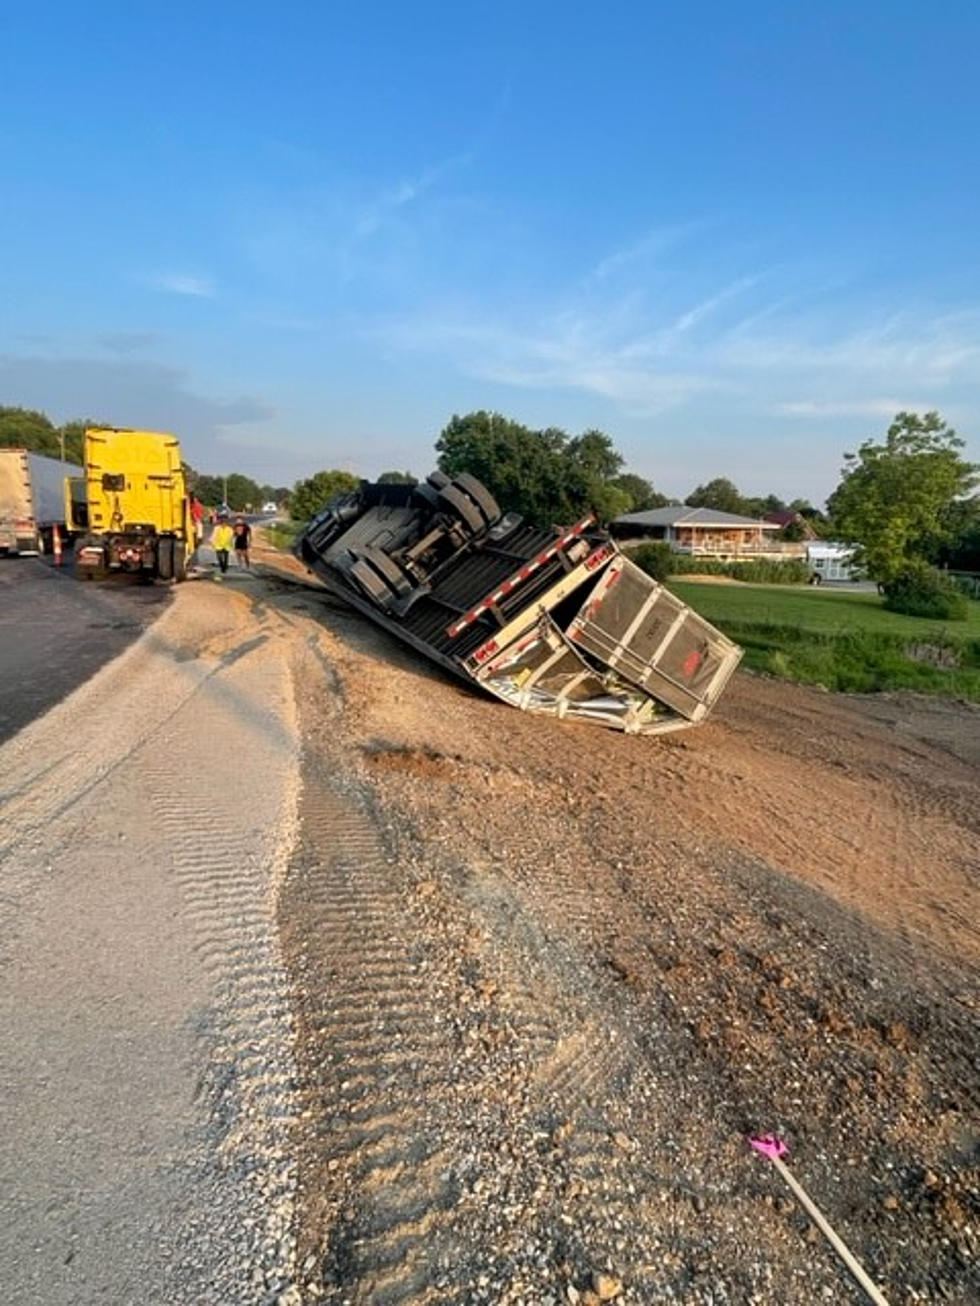 Overturned Tractor-trailer Spills $60,000 of Eggs in Pettis County